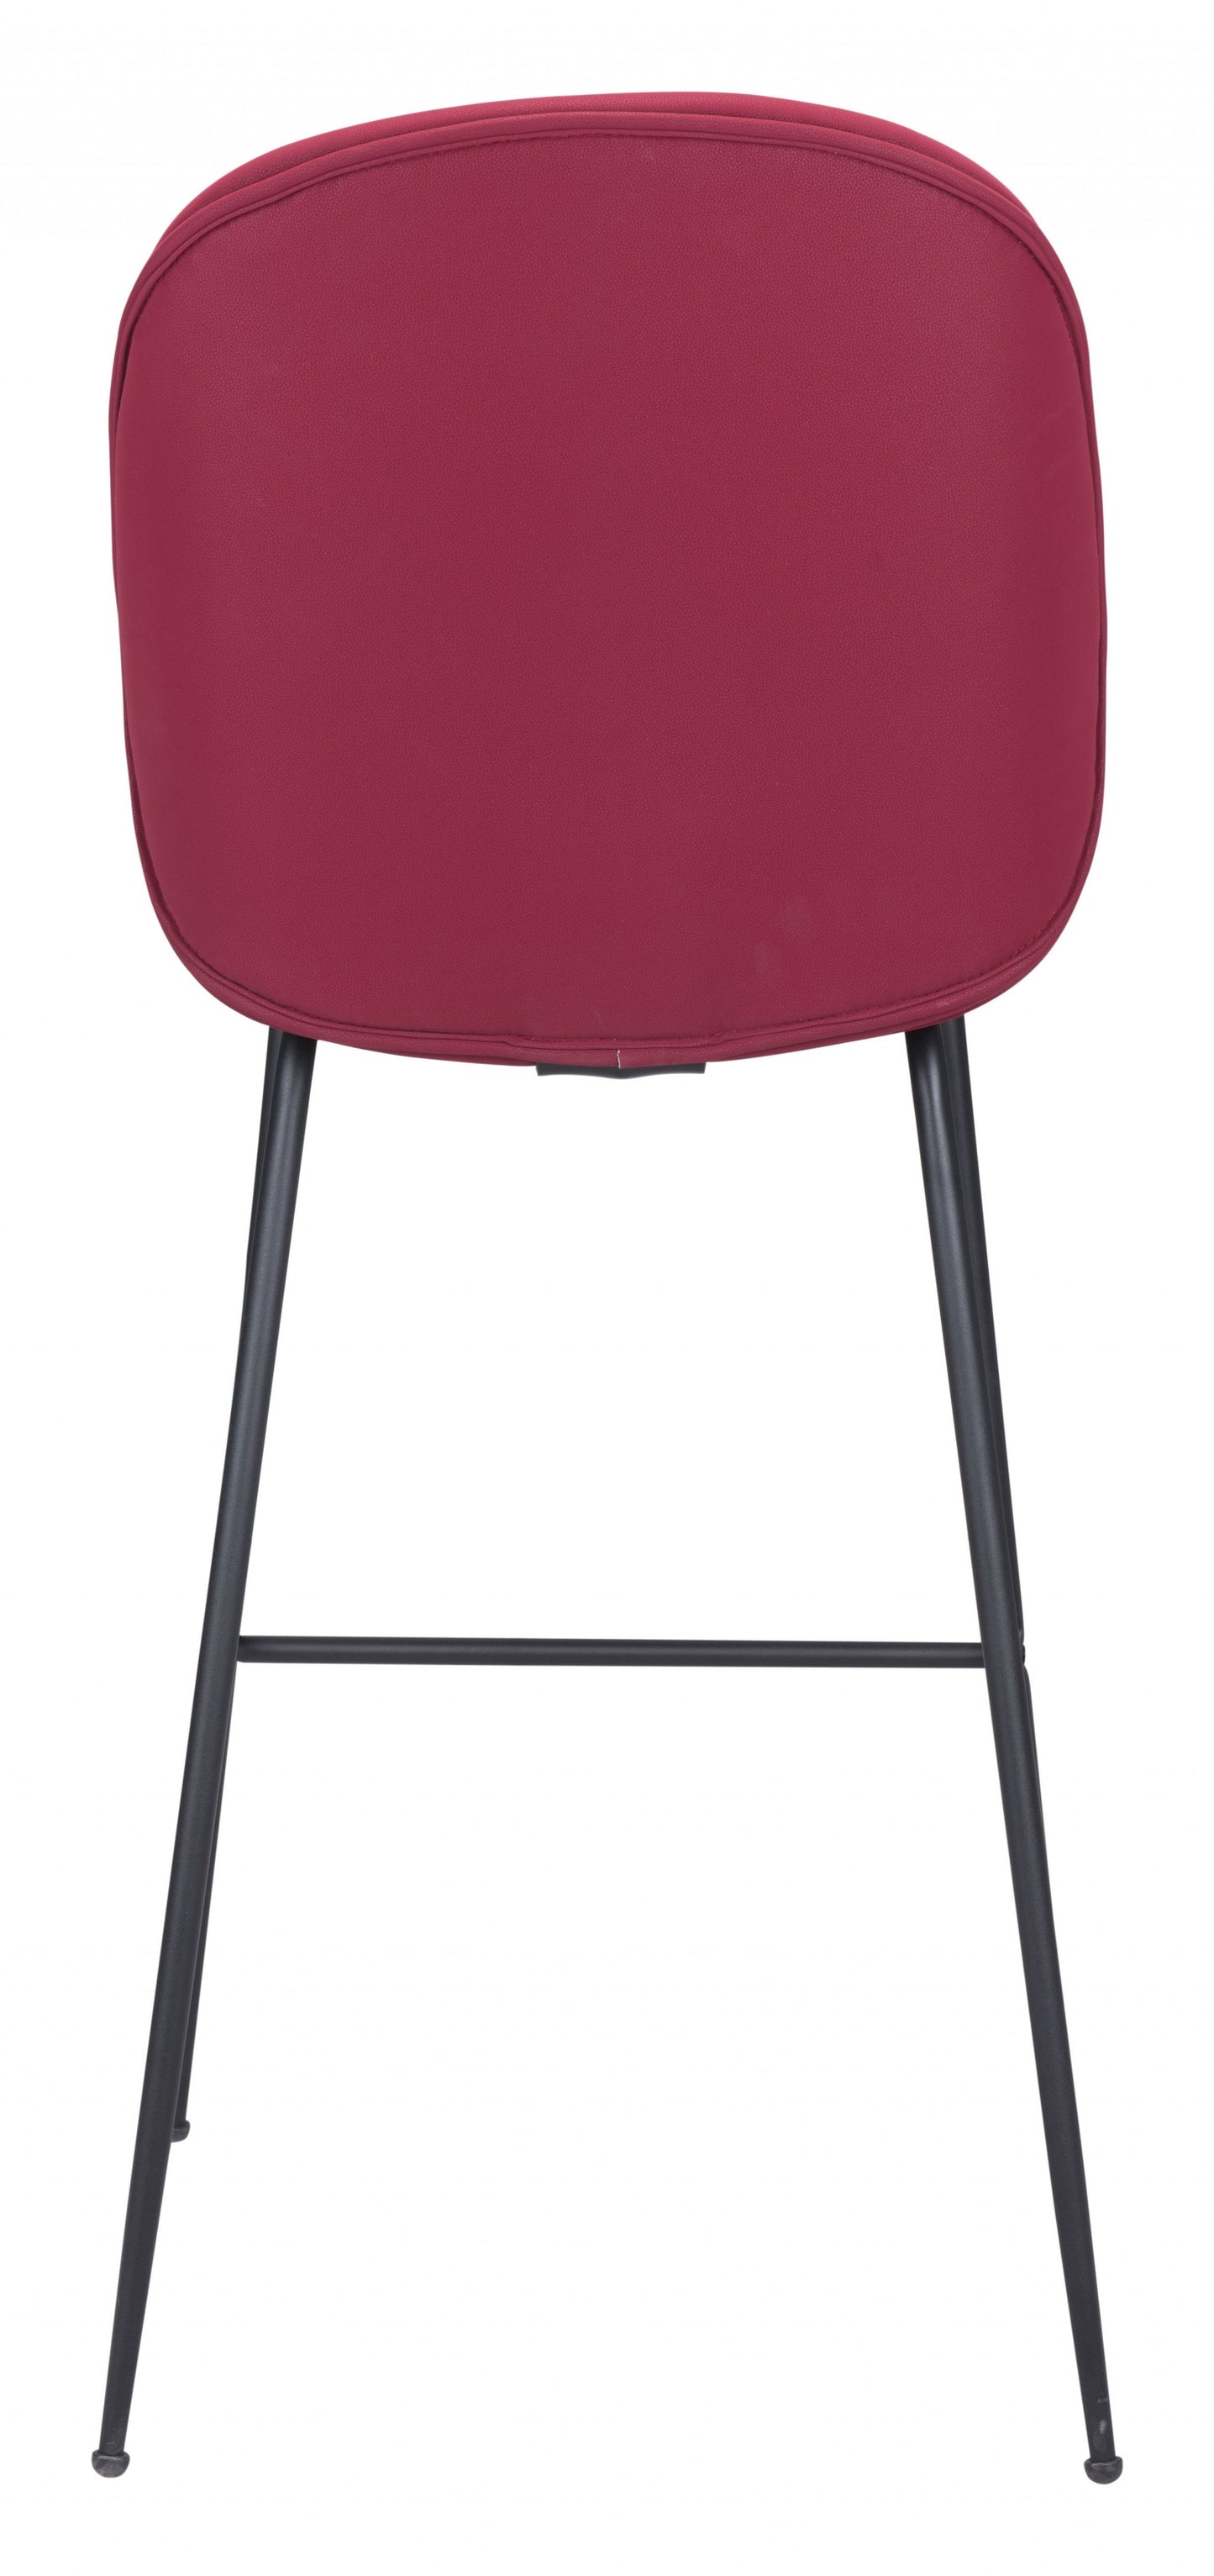 47" Red And Black Steel Low Back Bar Height Chair With Footrest By Homeroots